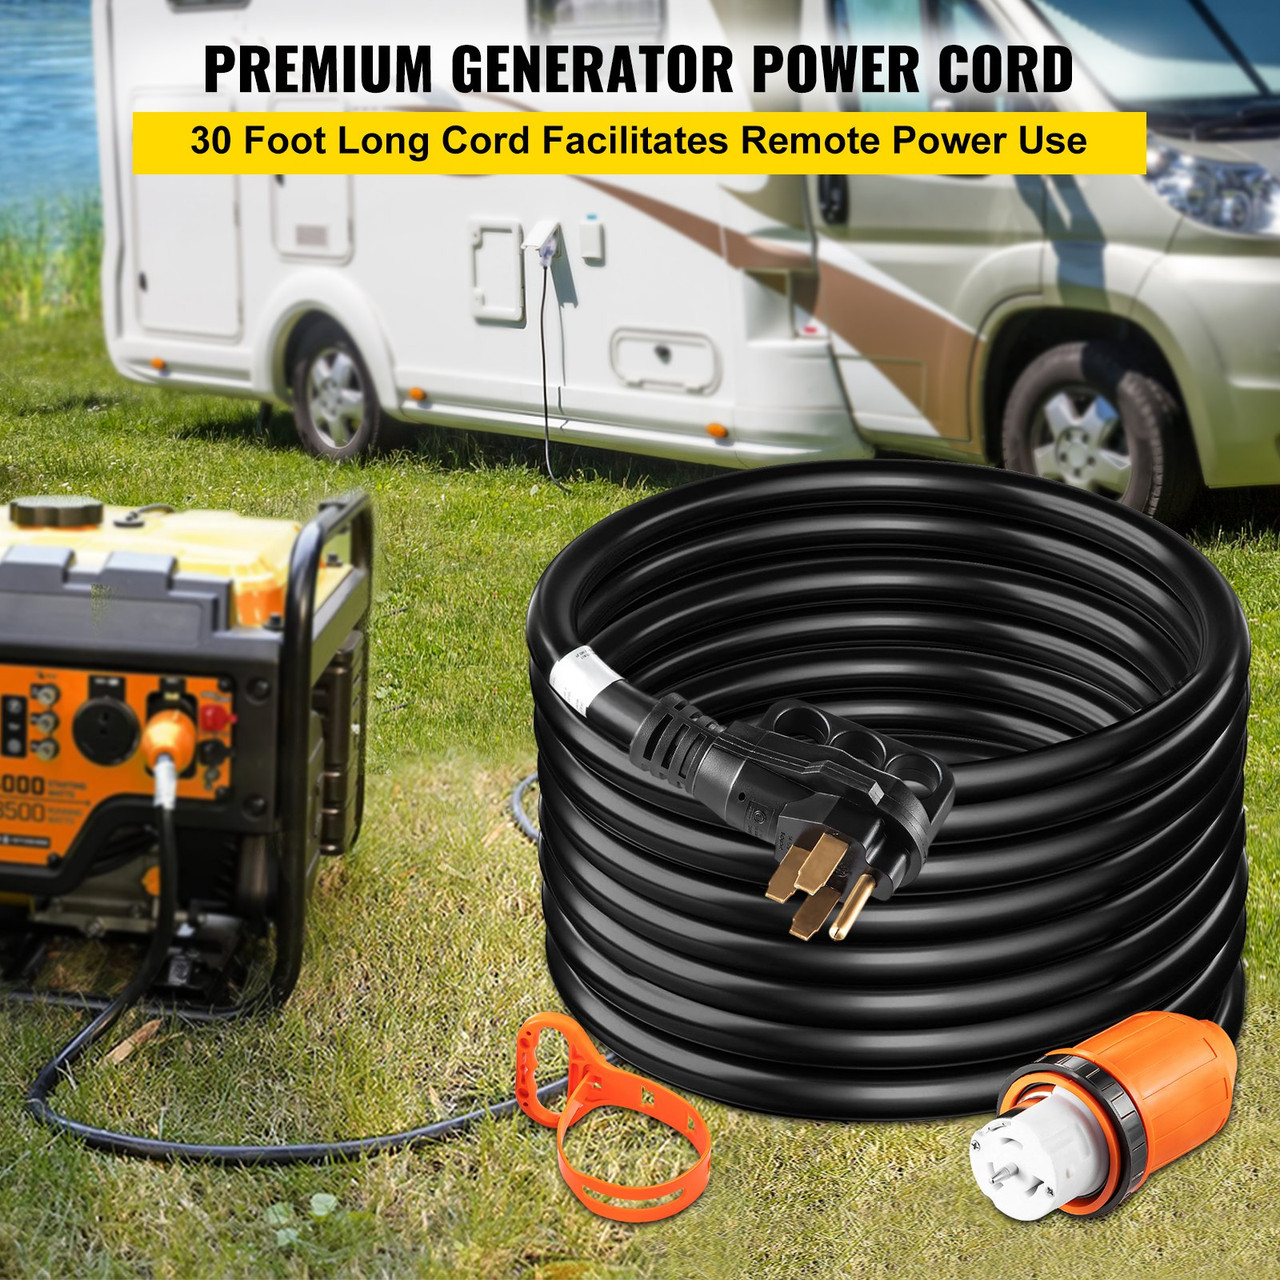 Generator Cord, 30' Generator Power Cord w/ Plug in & Out Pin of Inlet Box Side, 50AMP SS2-50R/CS6375 Style Inlets Cable, 12000W UL Listed Extension Cord, 125/250V Power Generator Cord w/ Strap